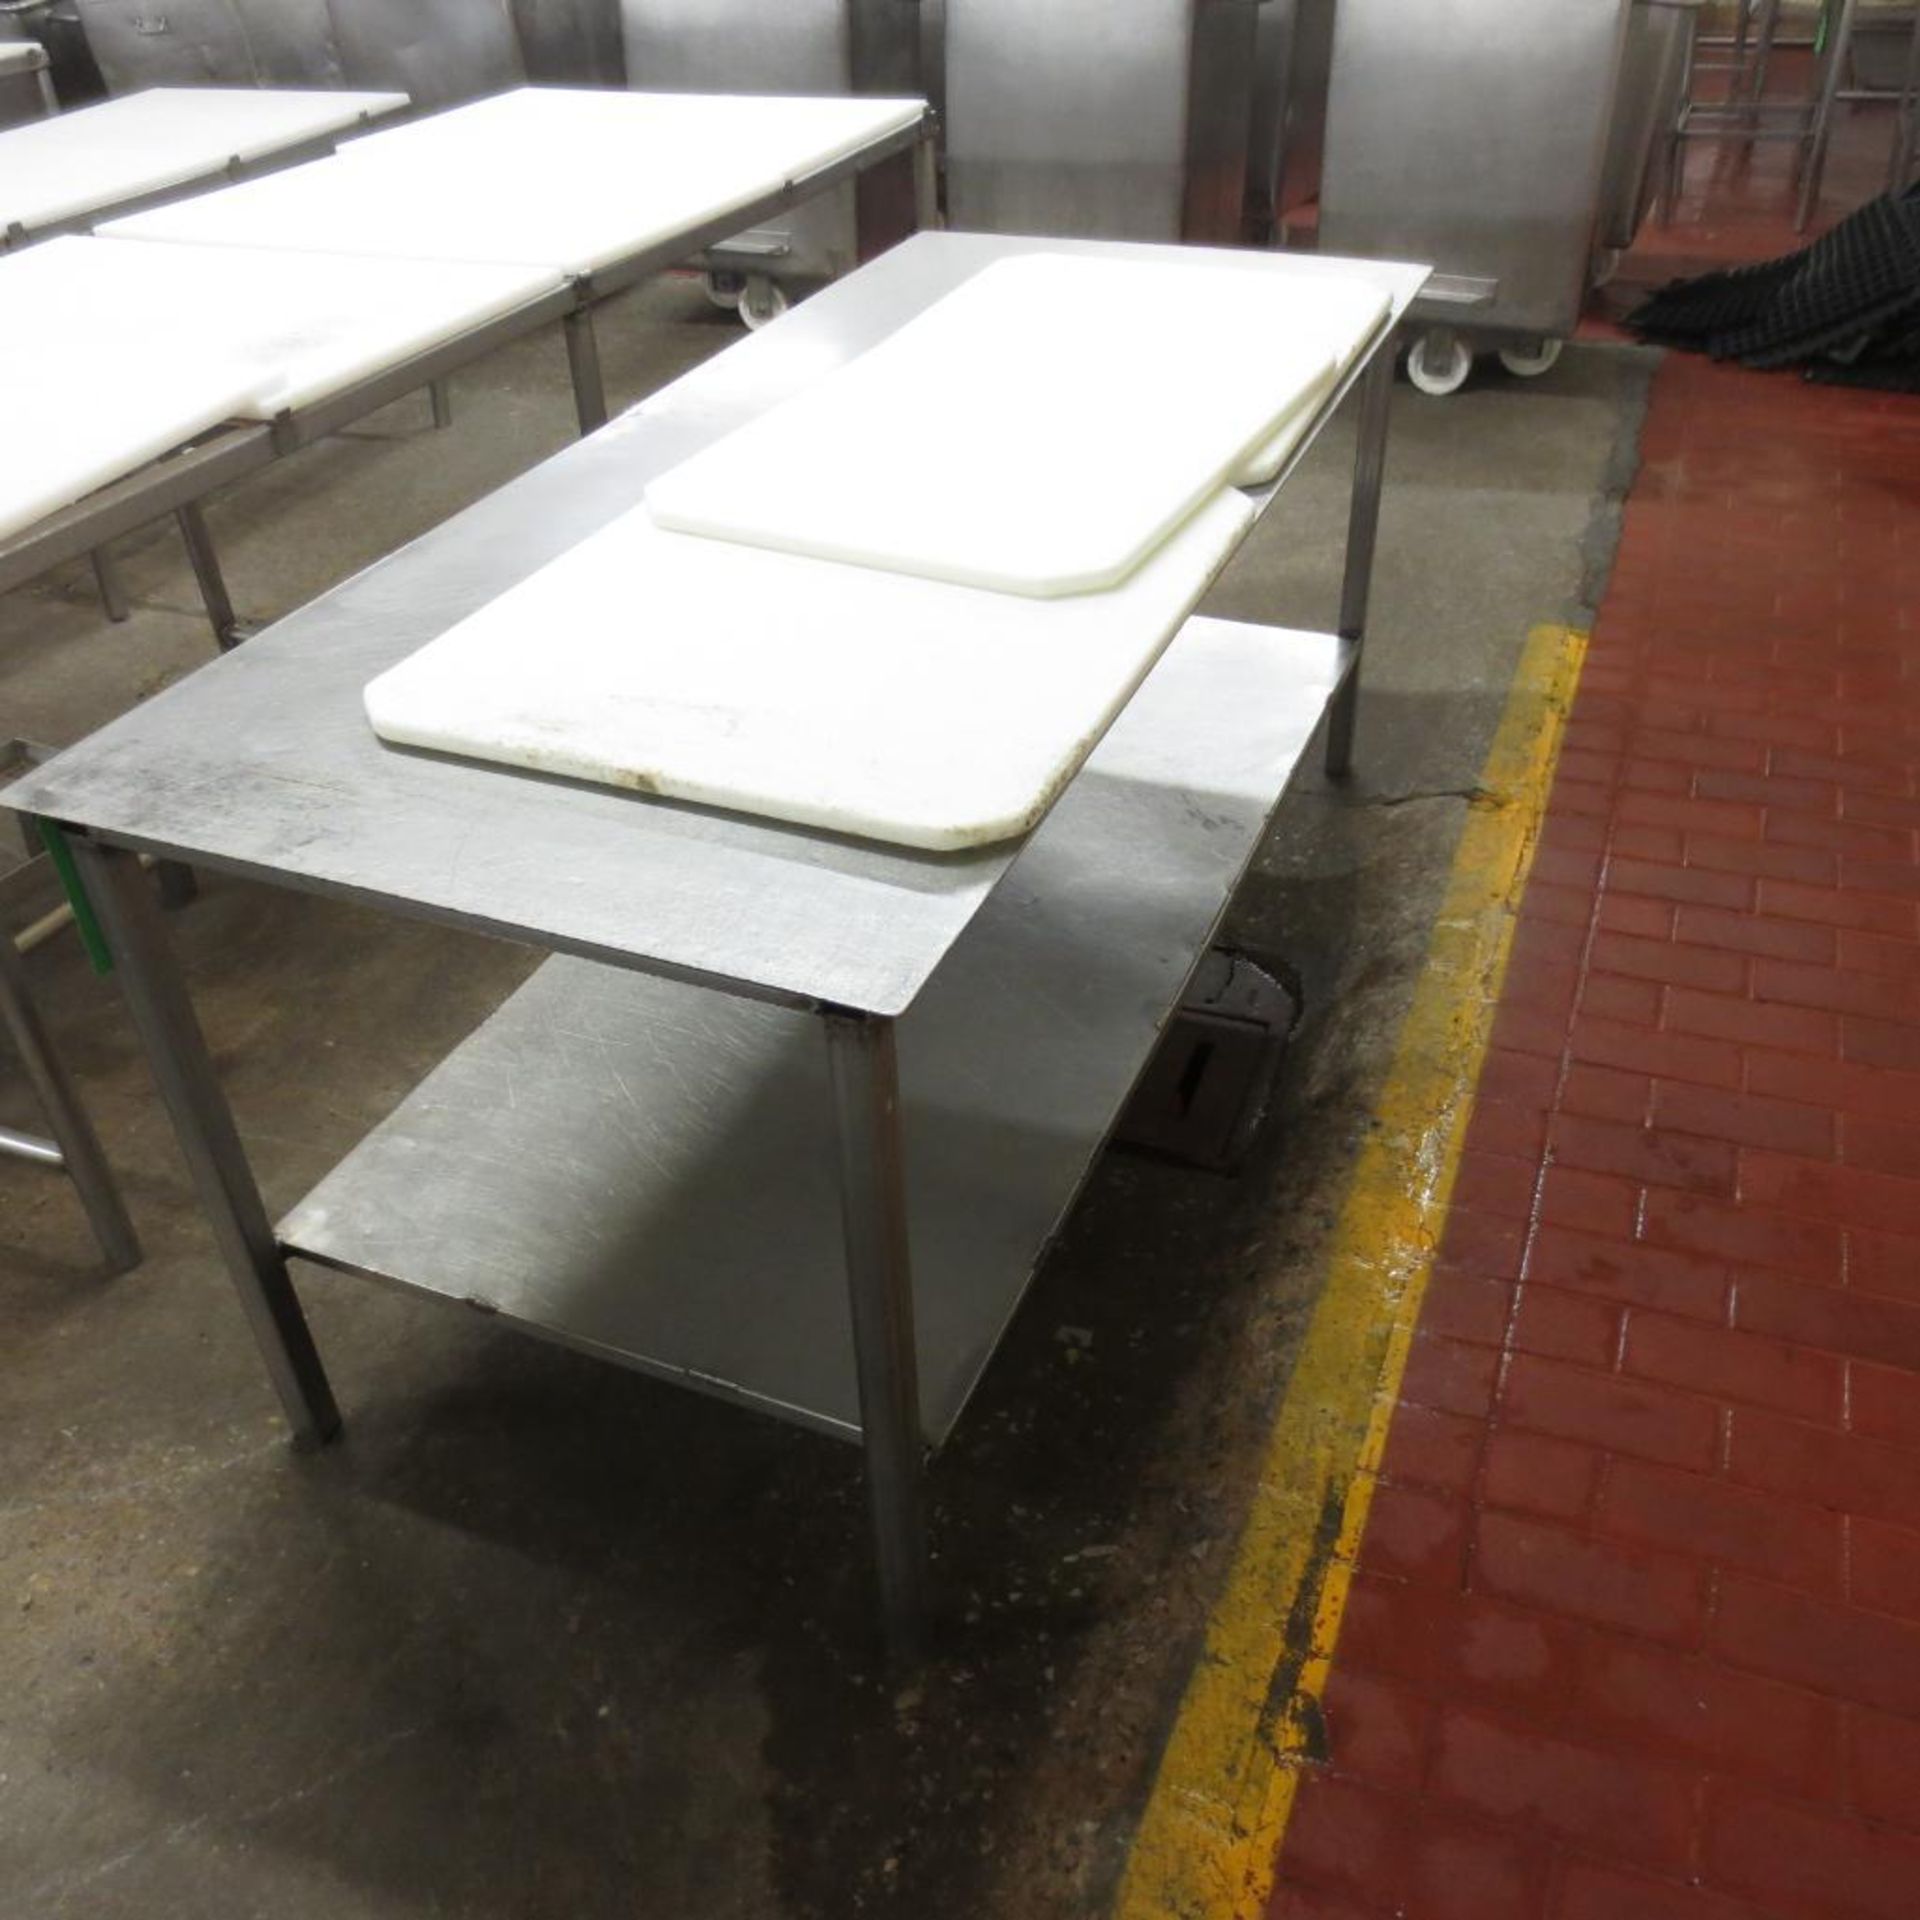 74" X 34 1/2" Stainless Table with (3) Cutting Board Tops - Image 2 of 2